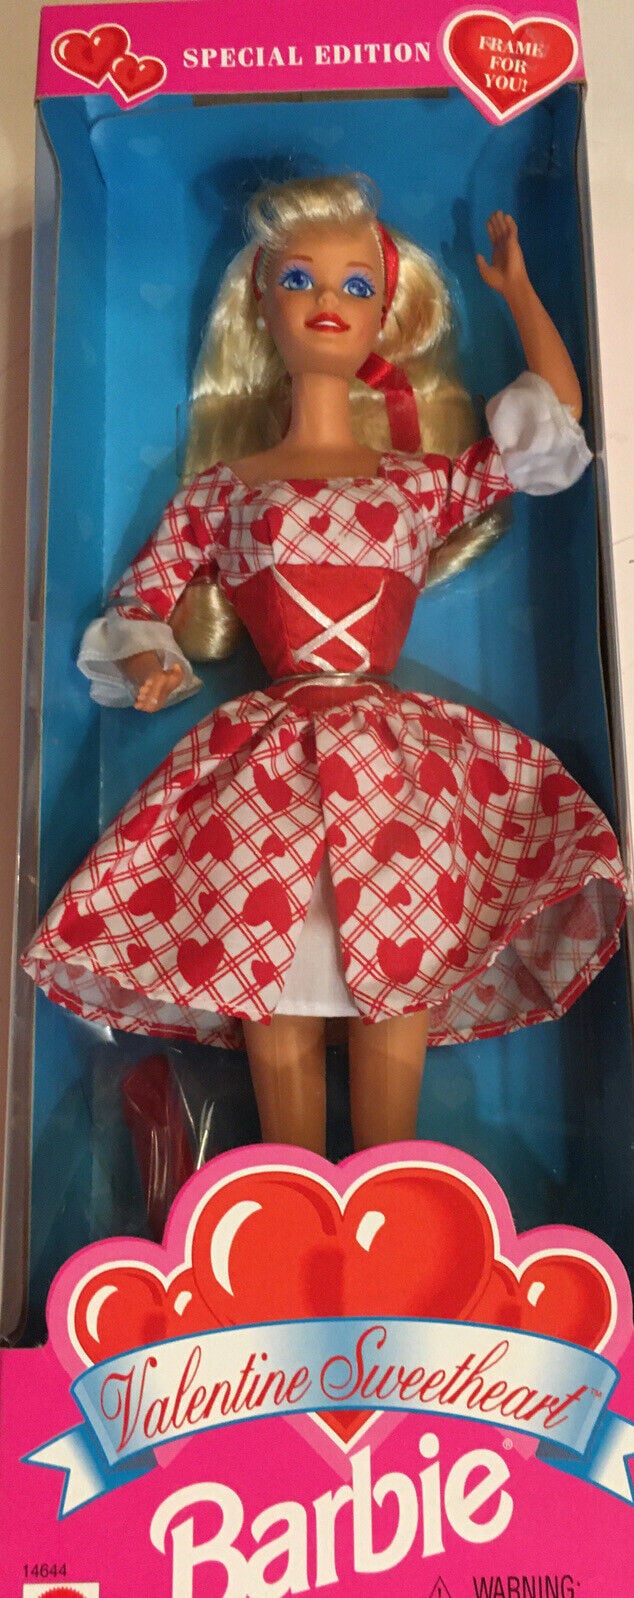 Valentine Sweetheart Barbie Doll The Best Barbie Dolls From the '90s